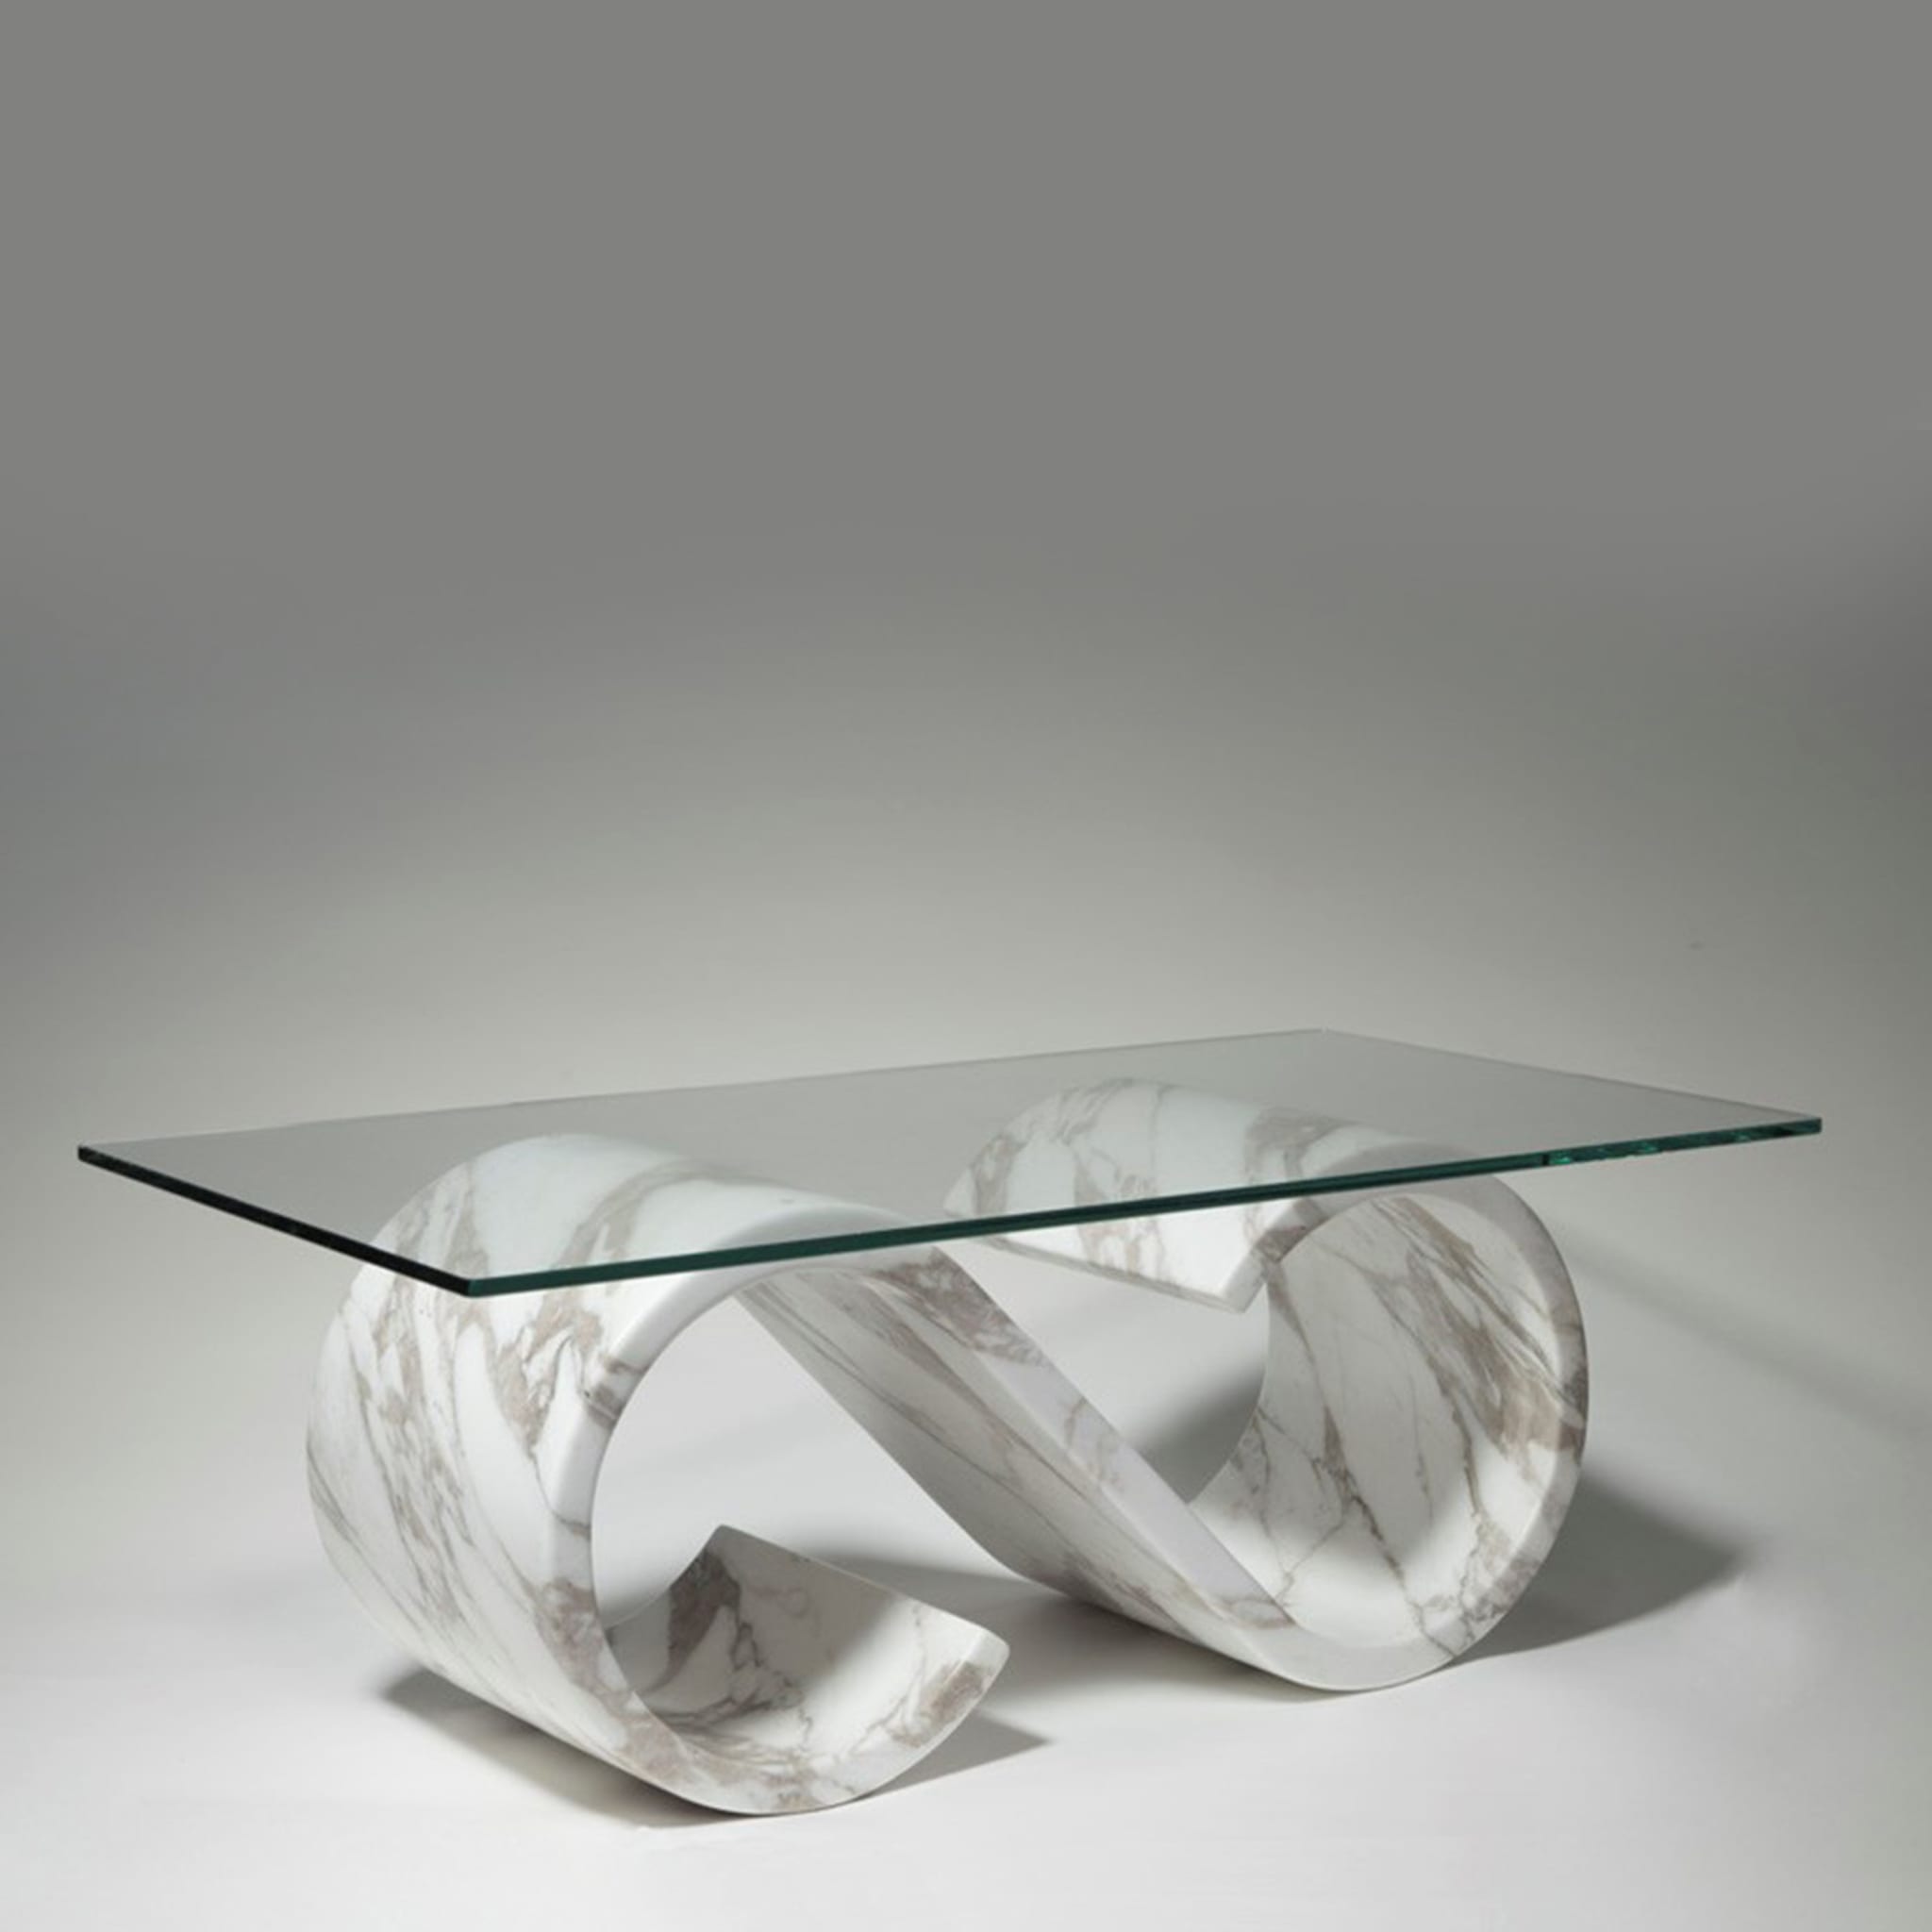 Stefano Marble Coffee Table  - Alternative view 1